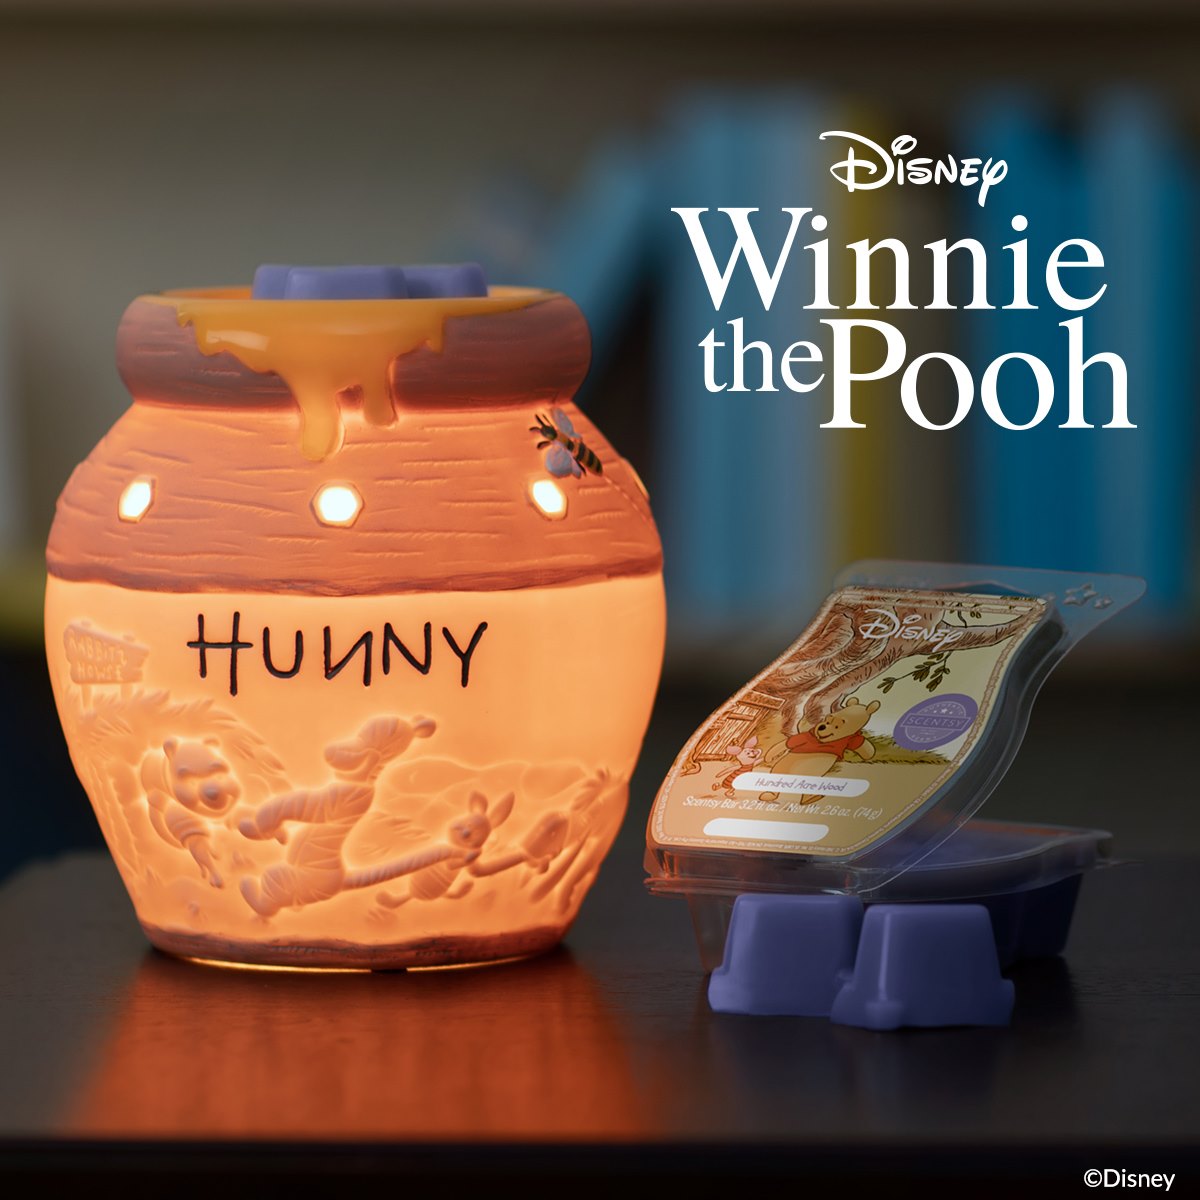 Scentsy Debuts Winnie the Pooh Hunny Warmer and Brings